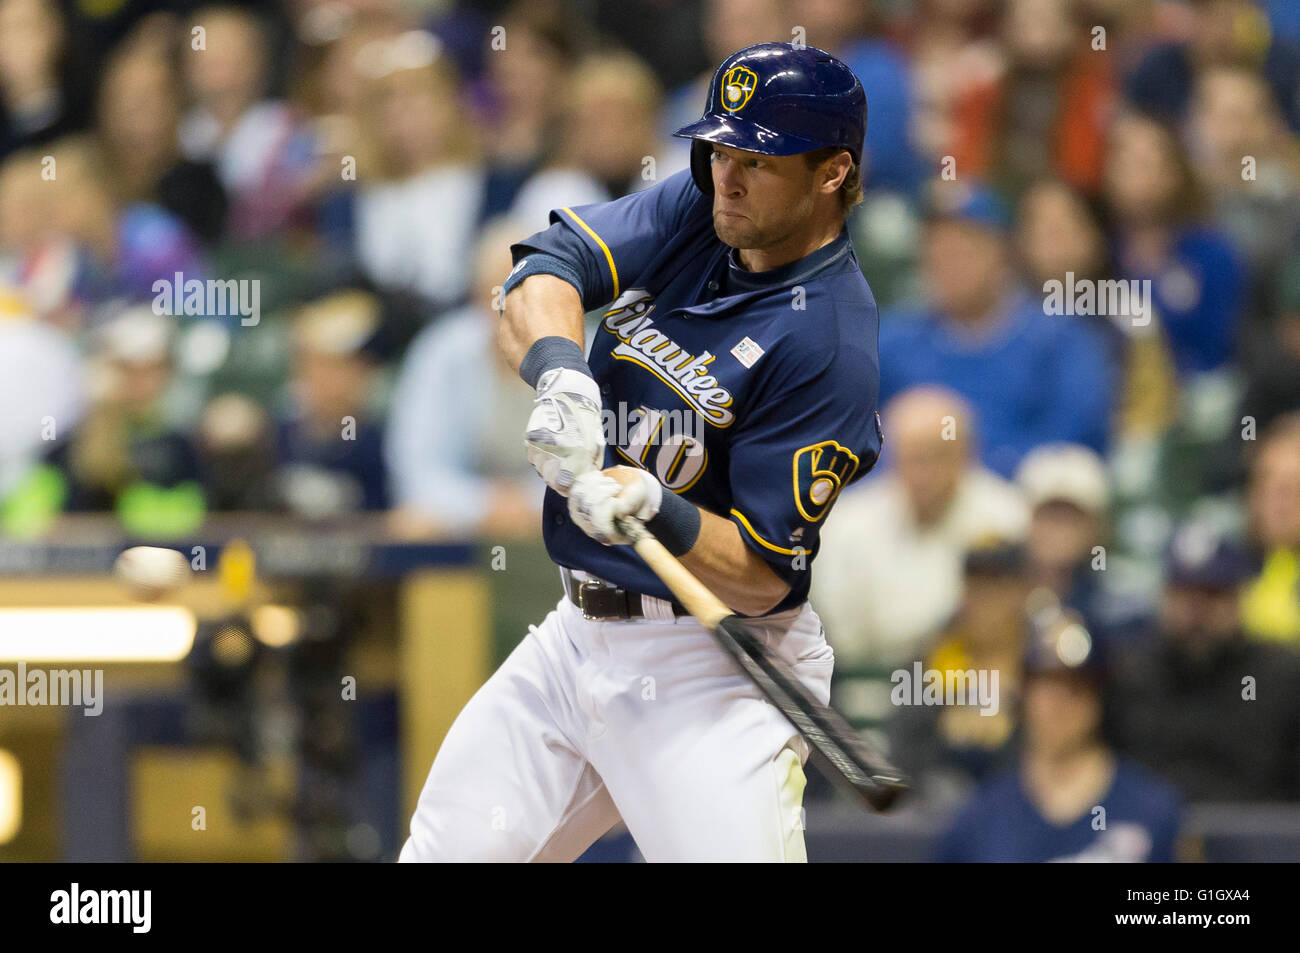 May 14, 2016: Milwaukee Brewers center fielder Kirk Nieuwenhuis #10 drives in a run with a double down the right field line in the 7th inning of Major League Baseball game between the Milwaukee Brewers and the San Diego Padres at Miller Park in Milwaukee, WI. John Fisher/CSM Stock Photo